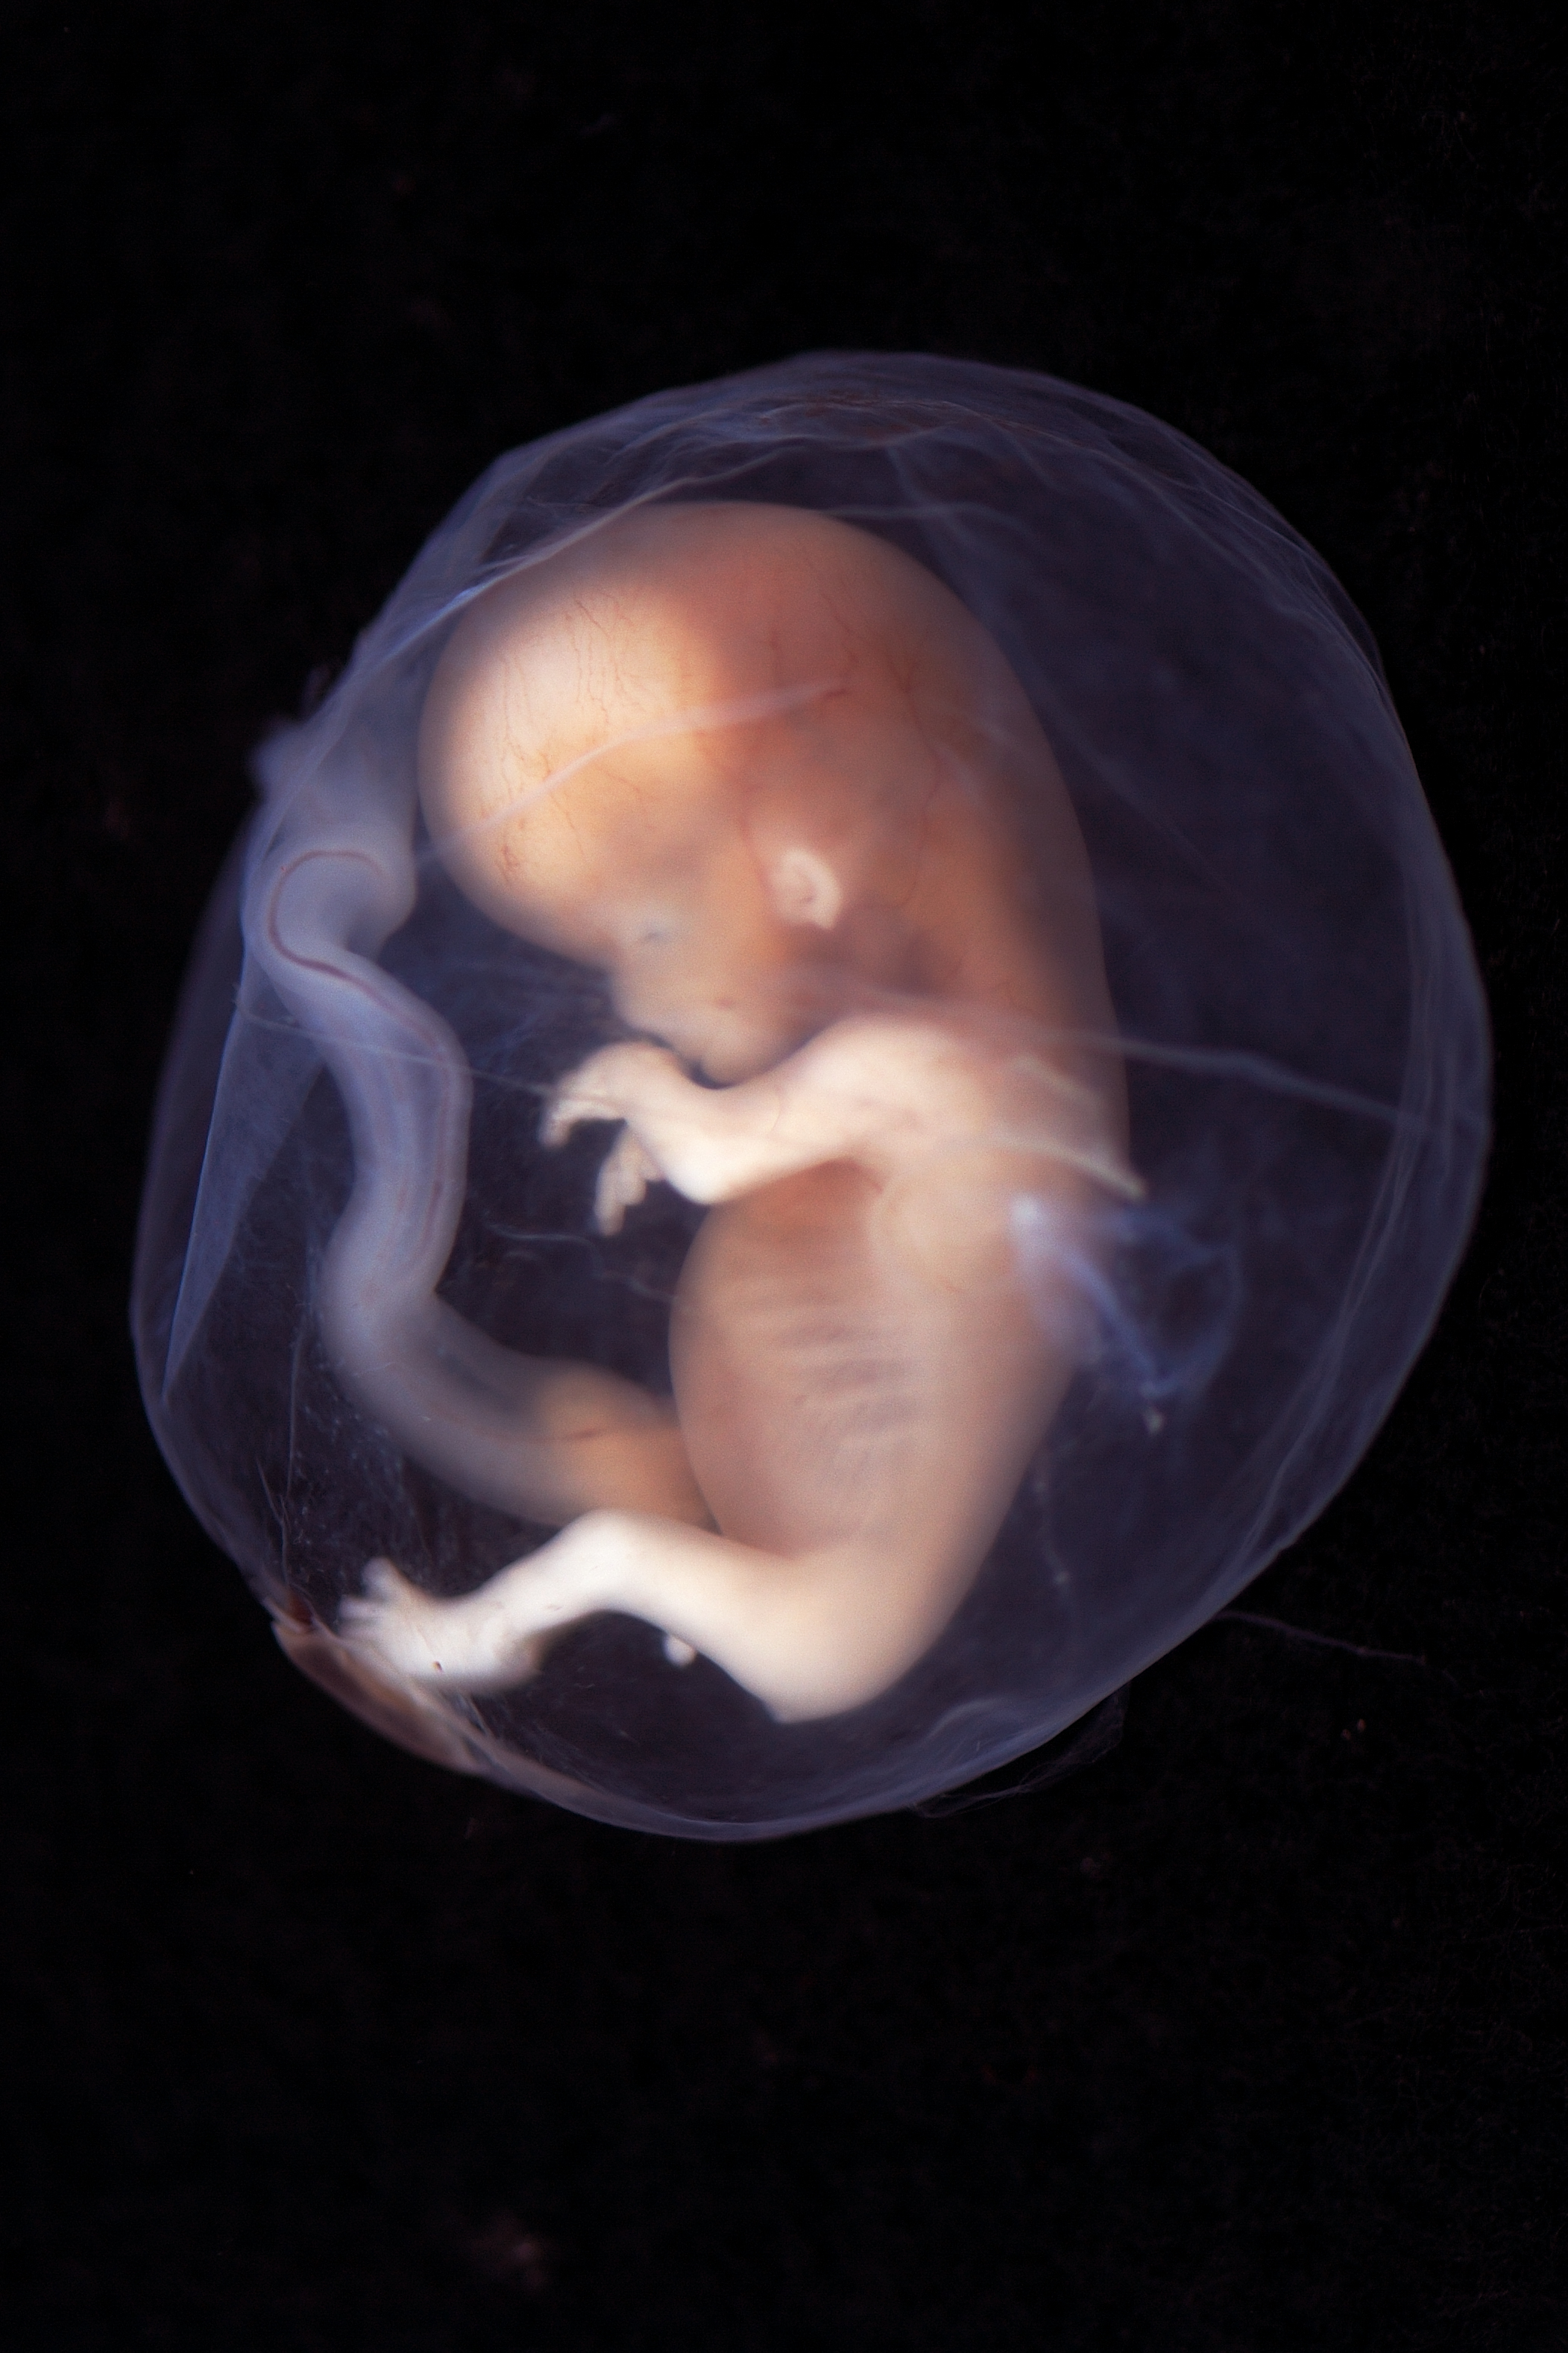 A human fetus.^[[Image](https://www.flickr.com/photos/lunarcaustic/2433149102/in/photostream/) by [lunar caustic](https://www.flickr.com/photos/lunarcaustic/) is licensed under [CC BY-SA 2.0](https://creativecommons.org/licenses/by-sa/2.0/)]